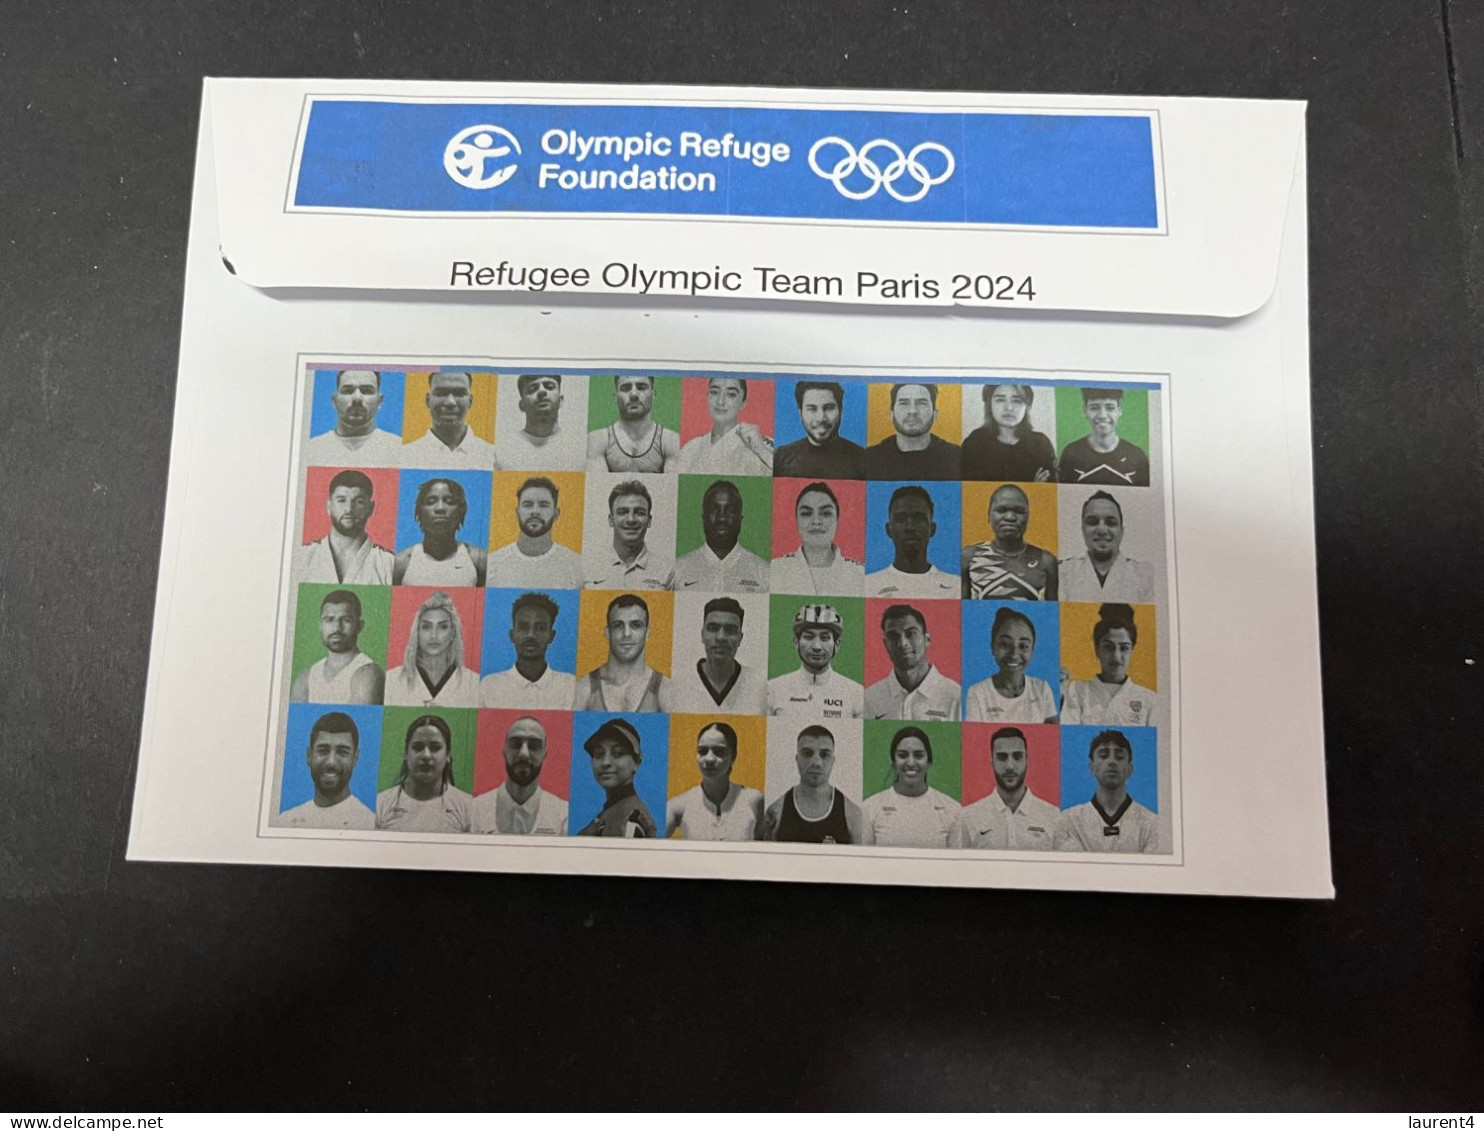 5-5-2024 (4 Z 12 A) Paris Olympic Games 2024 - Refugee Olympic Team (36 Athletes) - Sommer 2024: Paris